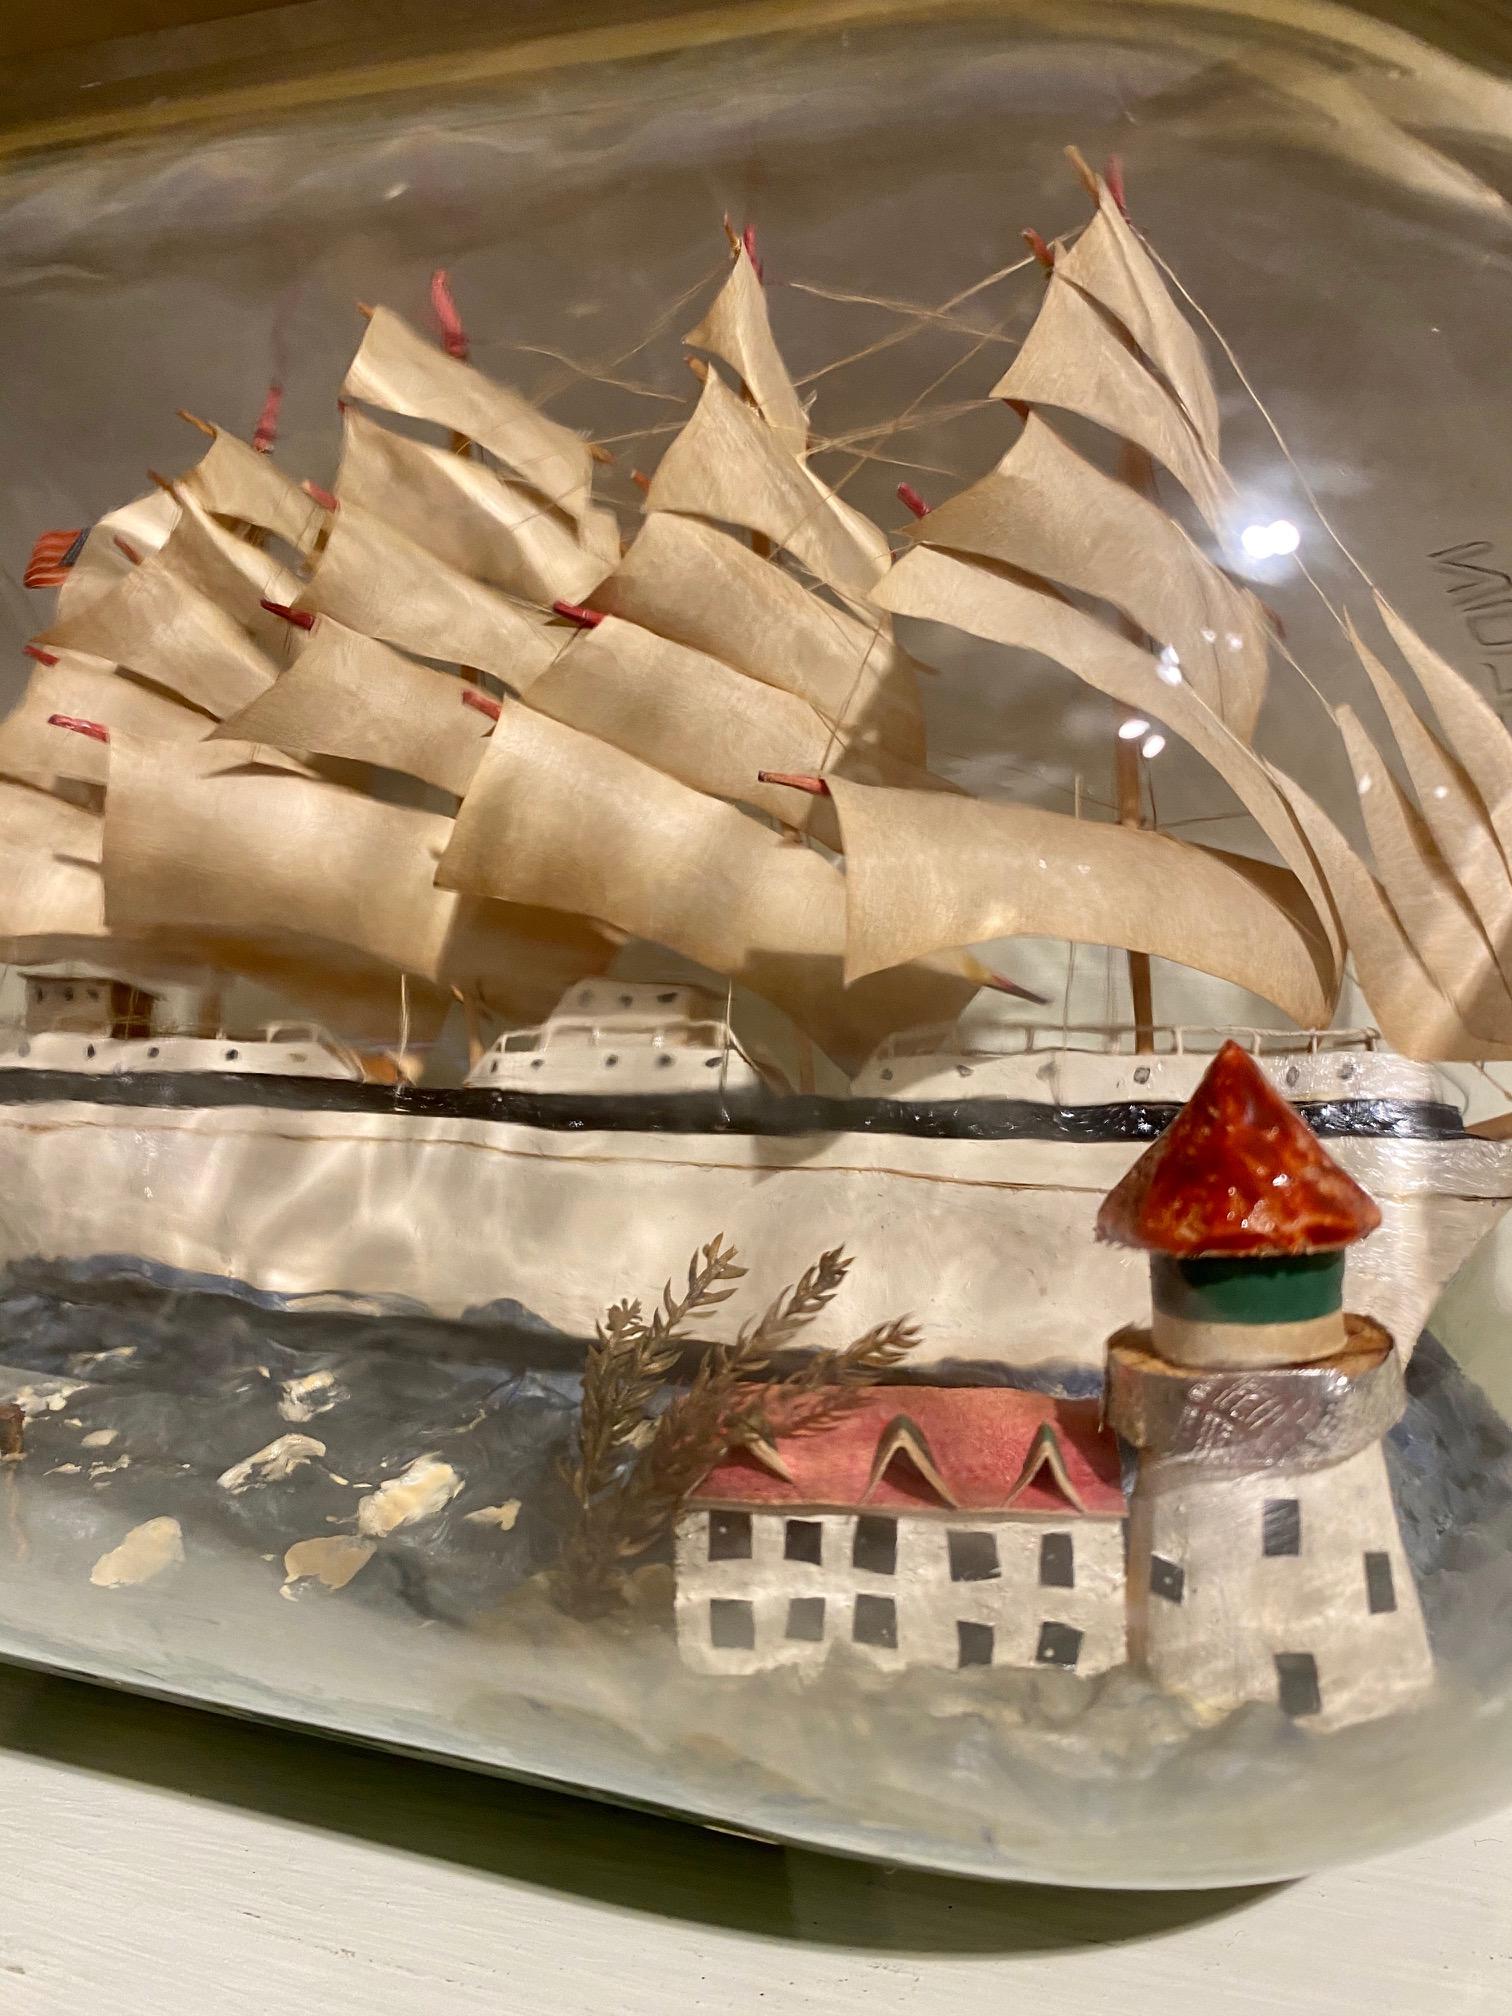 Vintage Folk Art large ship in a bottle, circa 1950s, having a handcrafted diorama with a four-masted Bark and a Sloop sailing past a lighthouse with keeper's cottage and tree. The model is made with a hand carved hull and paper sails set on stick